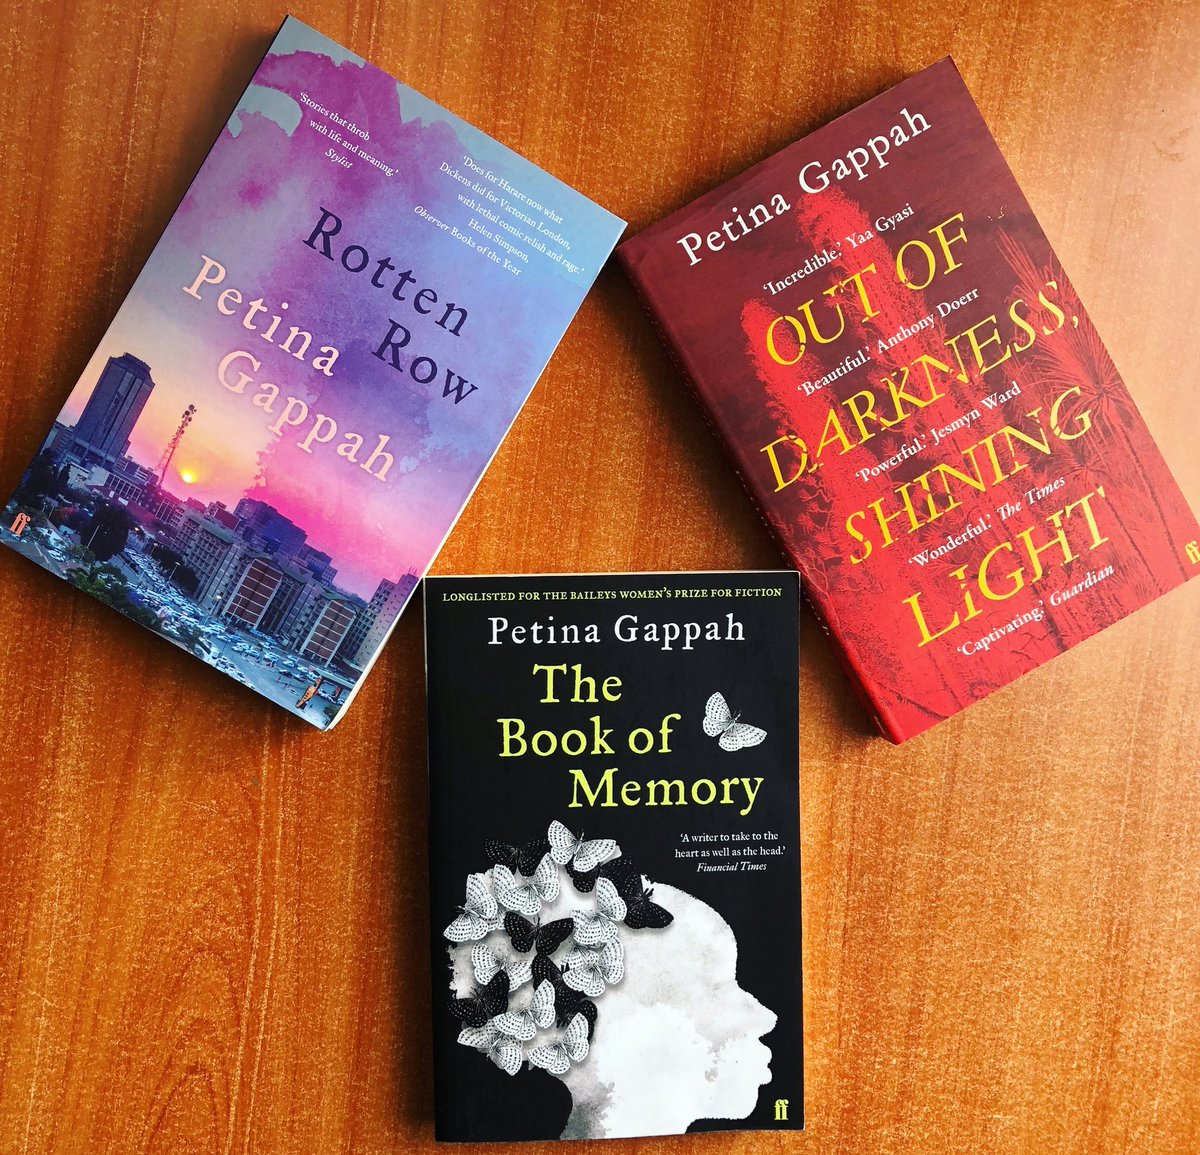 Today we celebrate Zimbabwean writer Petina Gappah. She is the author of two novels, ‘Out of Darkness, Shining Light’; ‘The Book of Memory’; and two short story collections, ‘Rotten Row’ and ‘An Elegy for Easterly’. Have you read her works? #lolwebookske #kisumu